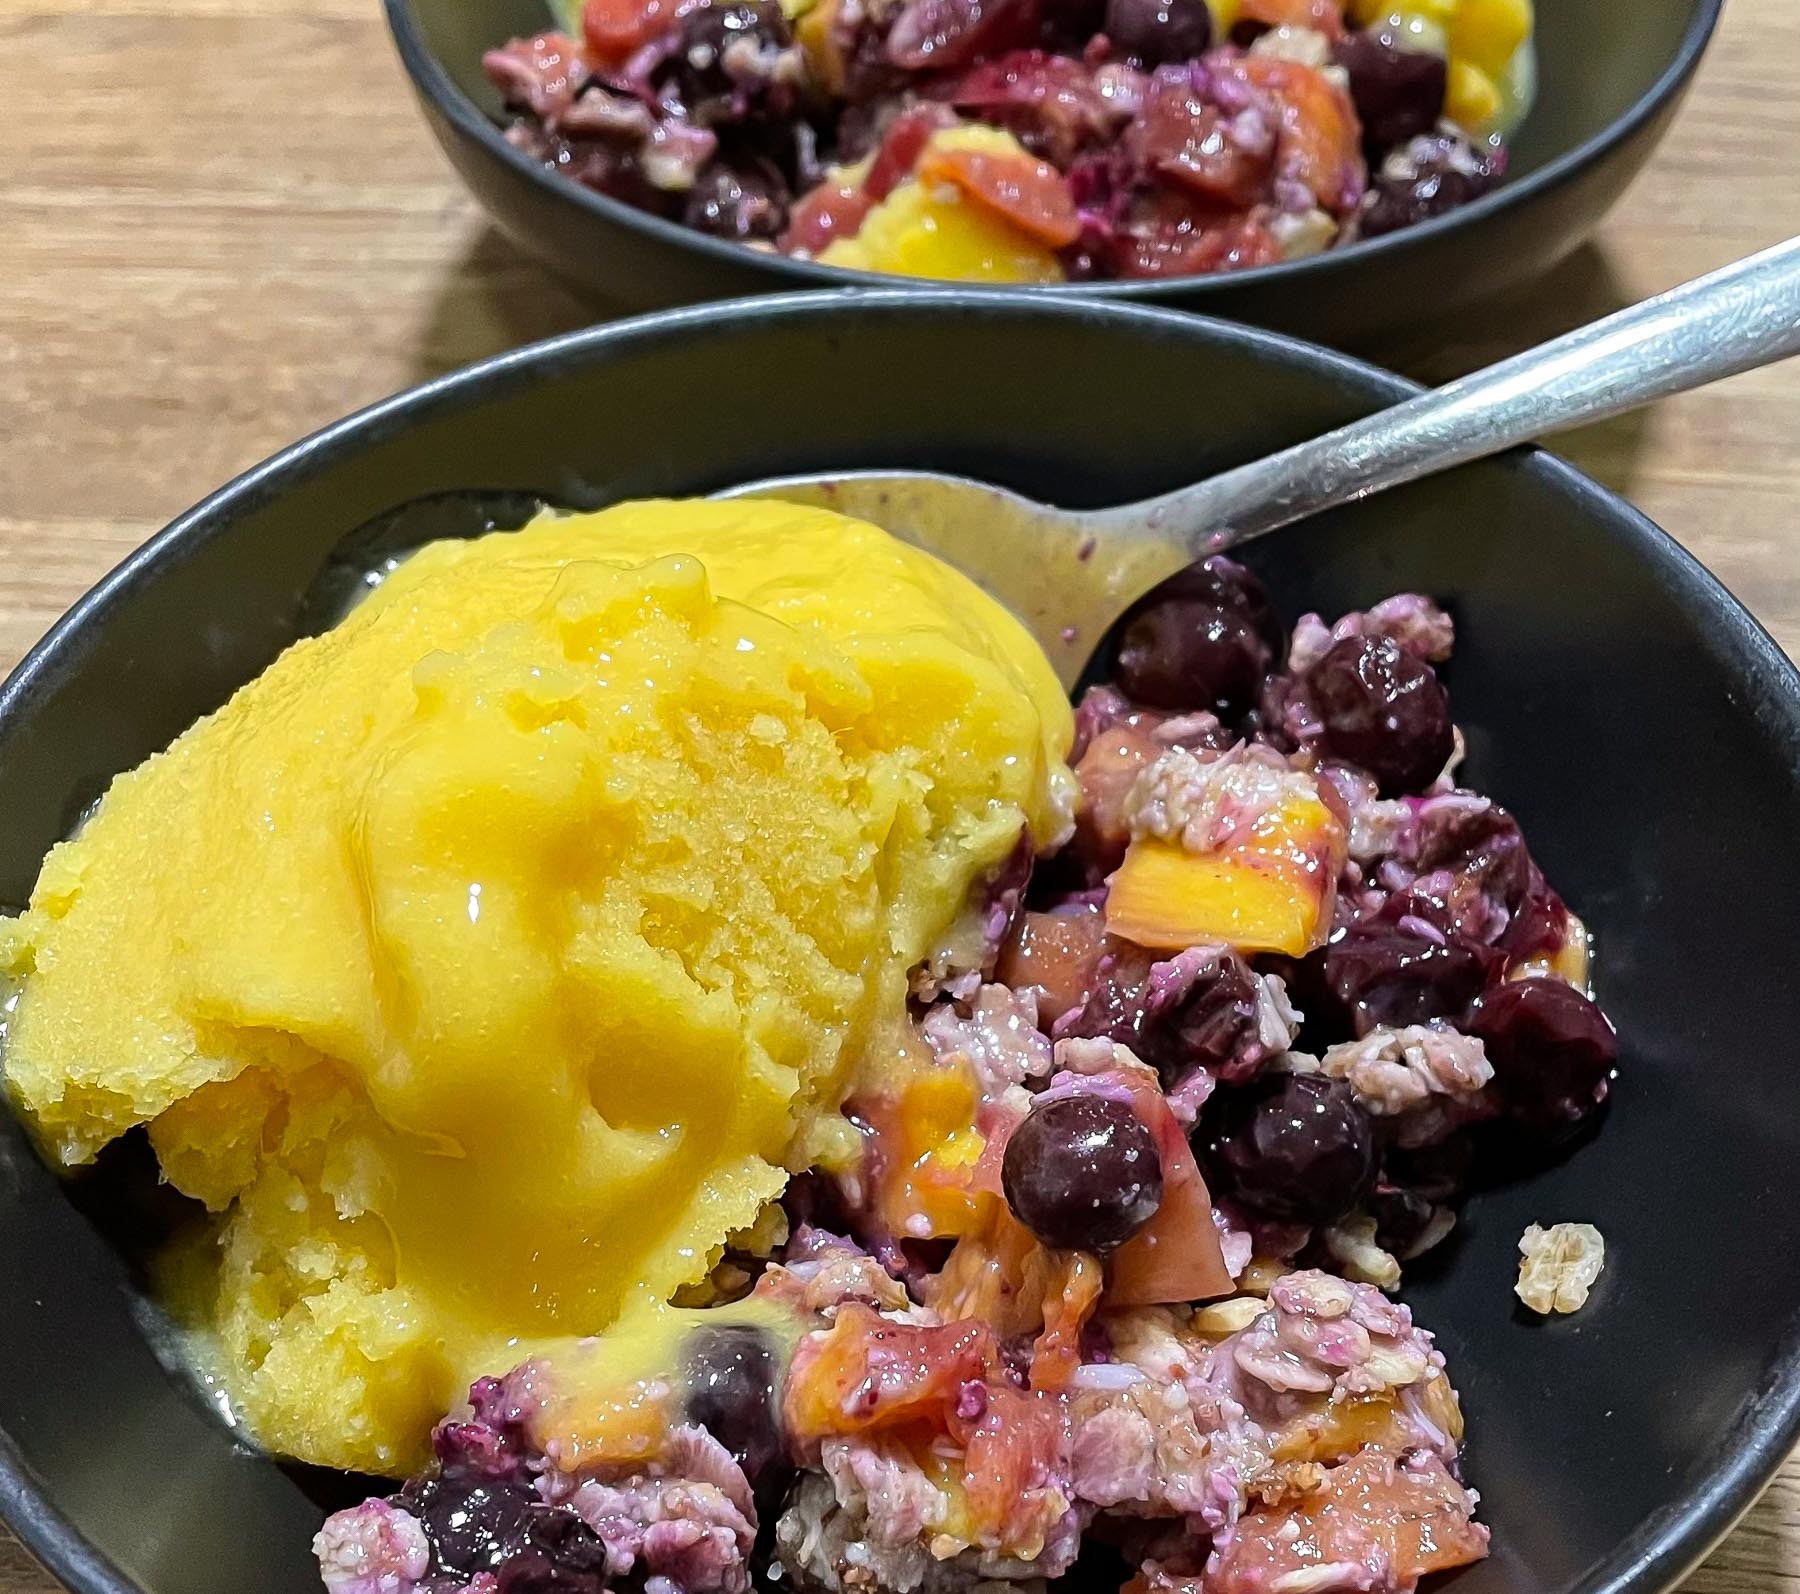 alt="a bowl with mango and blueberry cobbler topped with mango ice cream."